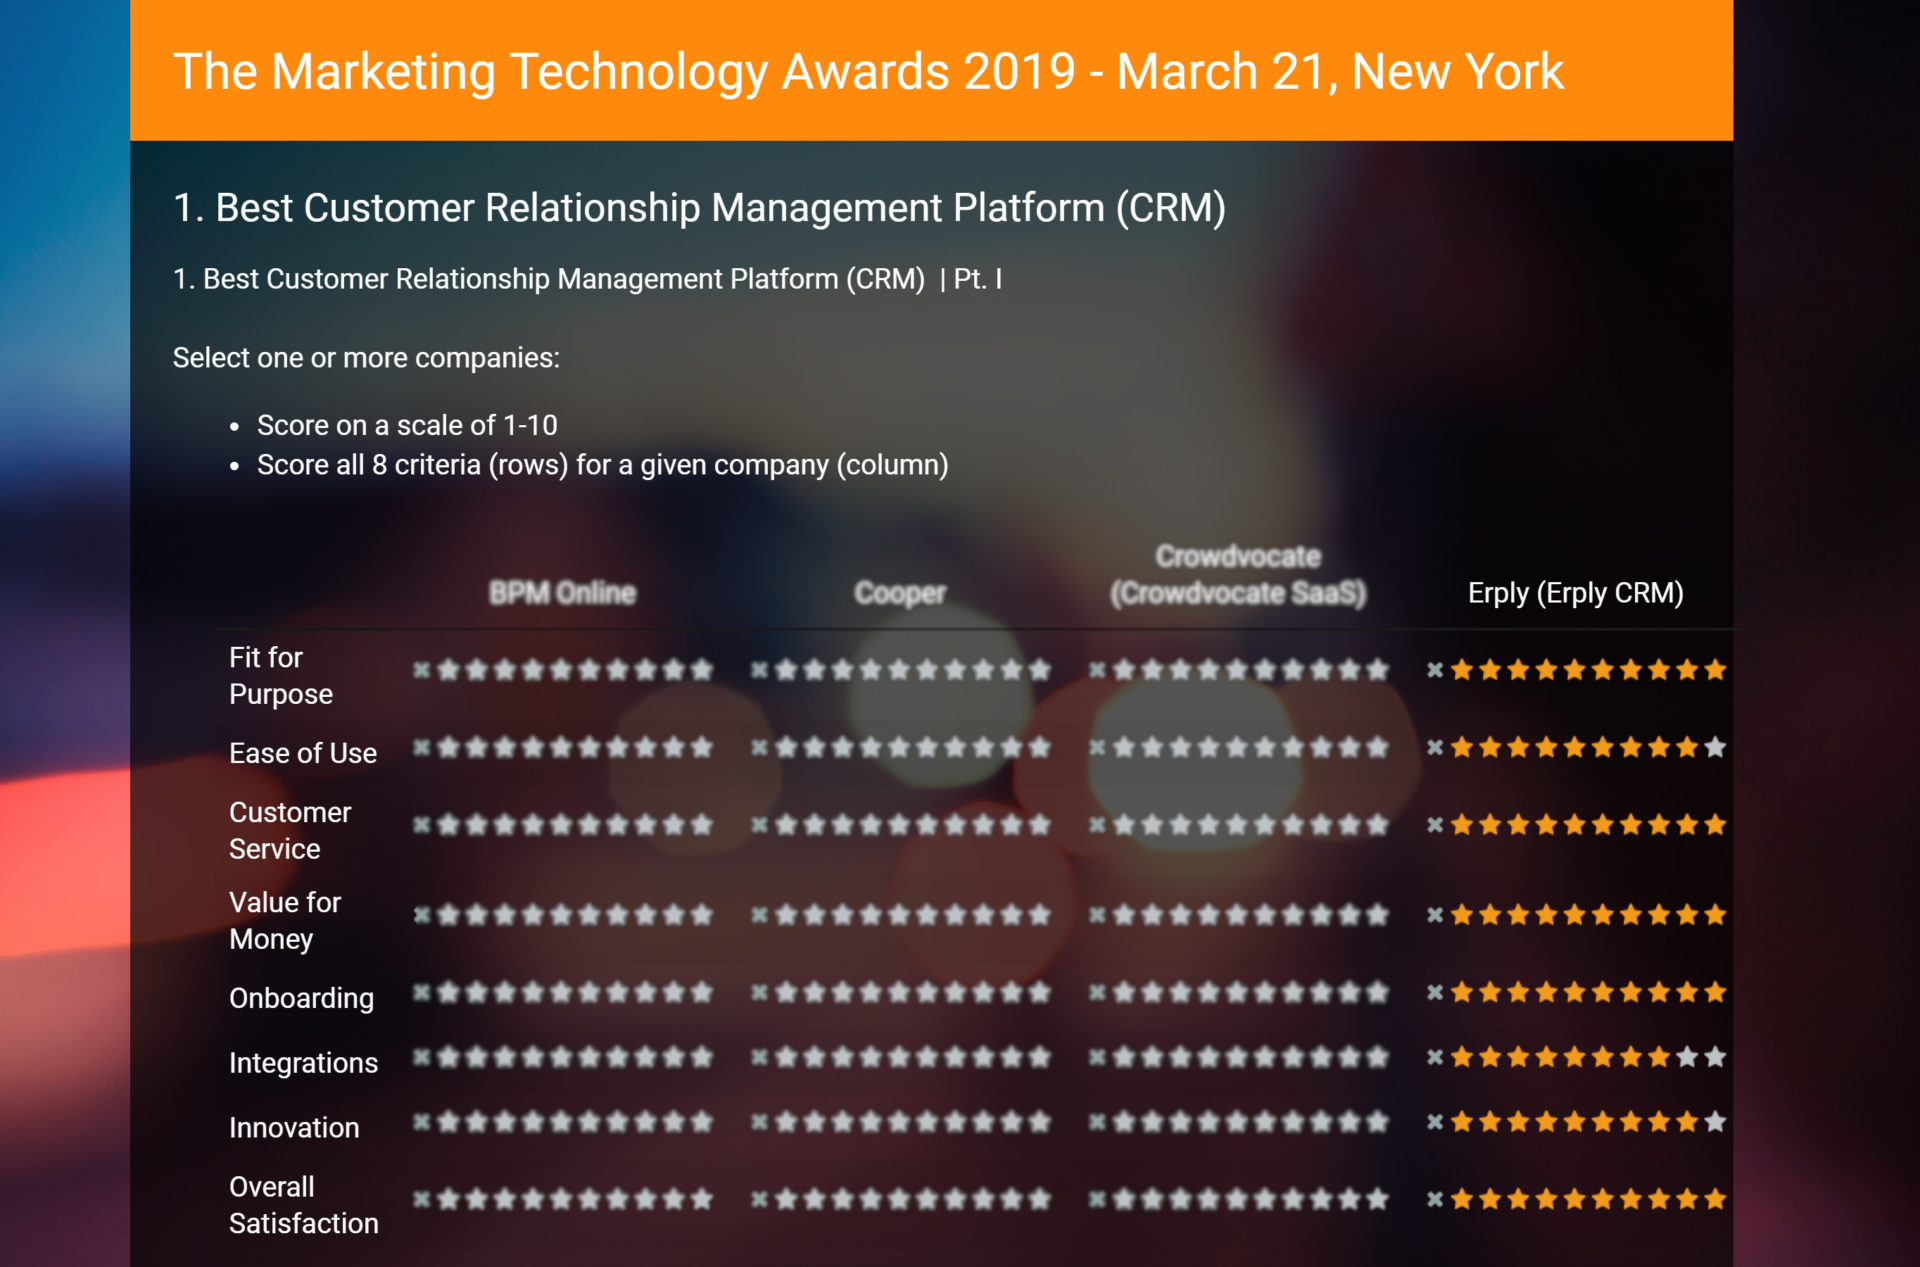 erply nominated as a best crm tool